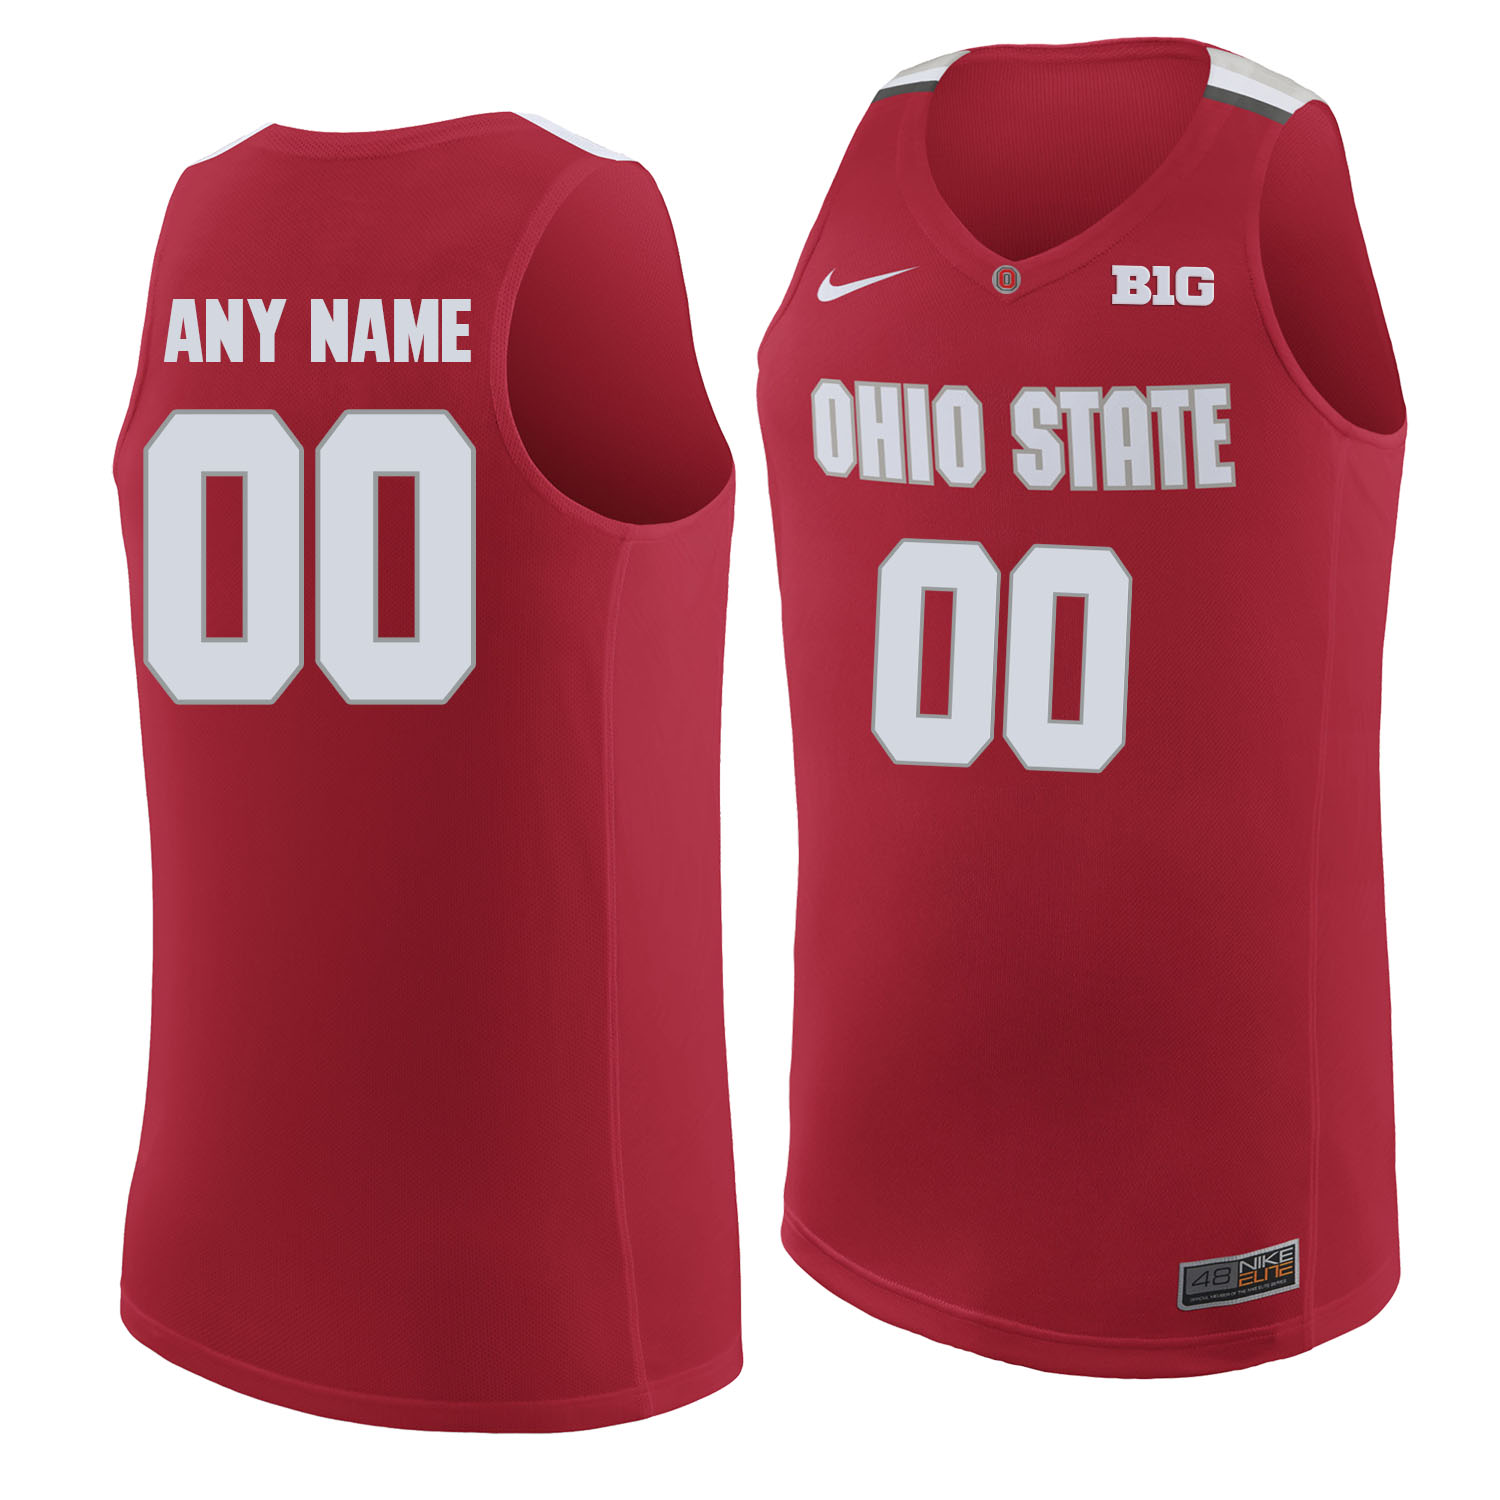 Ohio State Buckeyes Red Men's Customized College Basketball Jersey